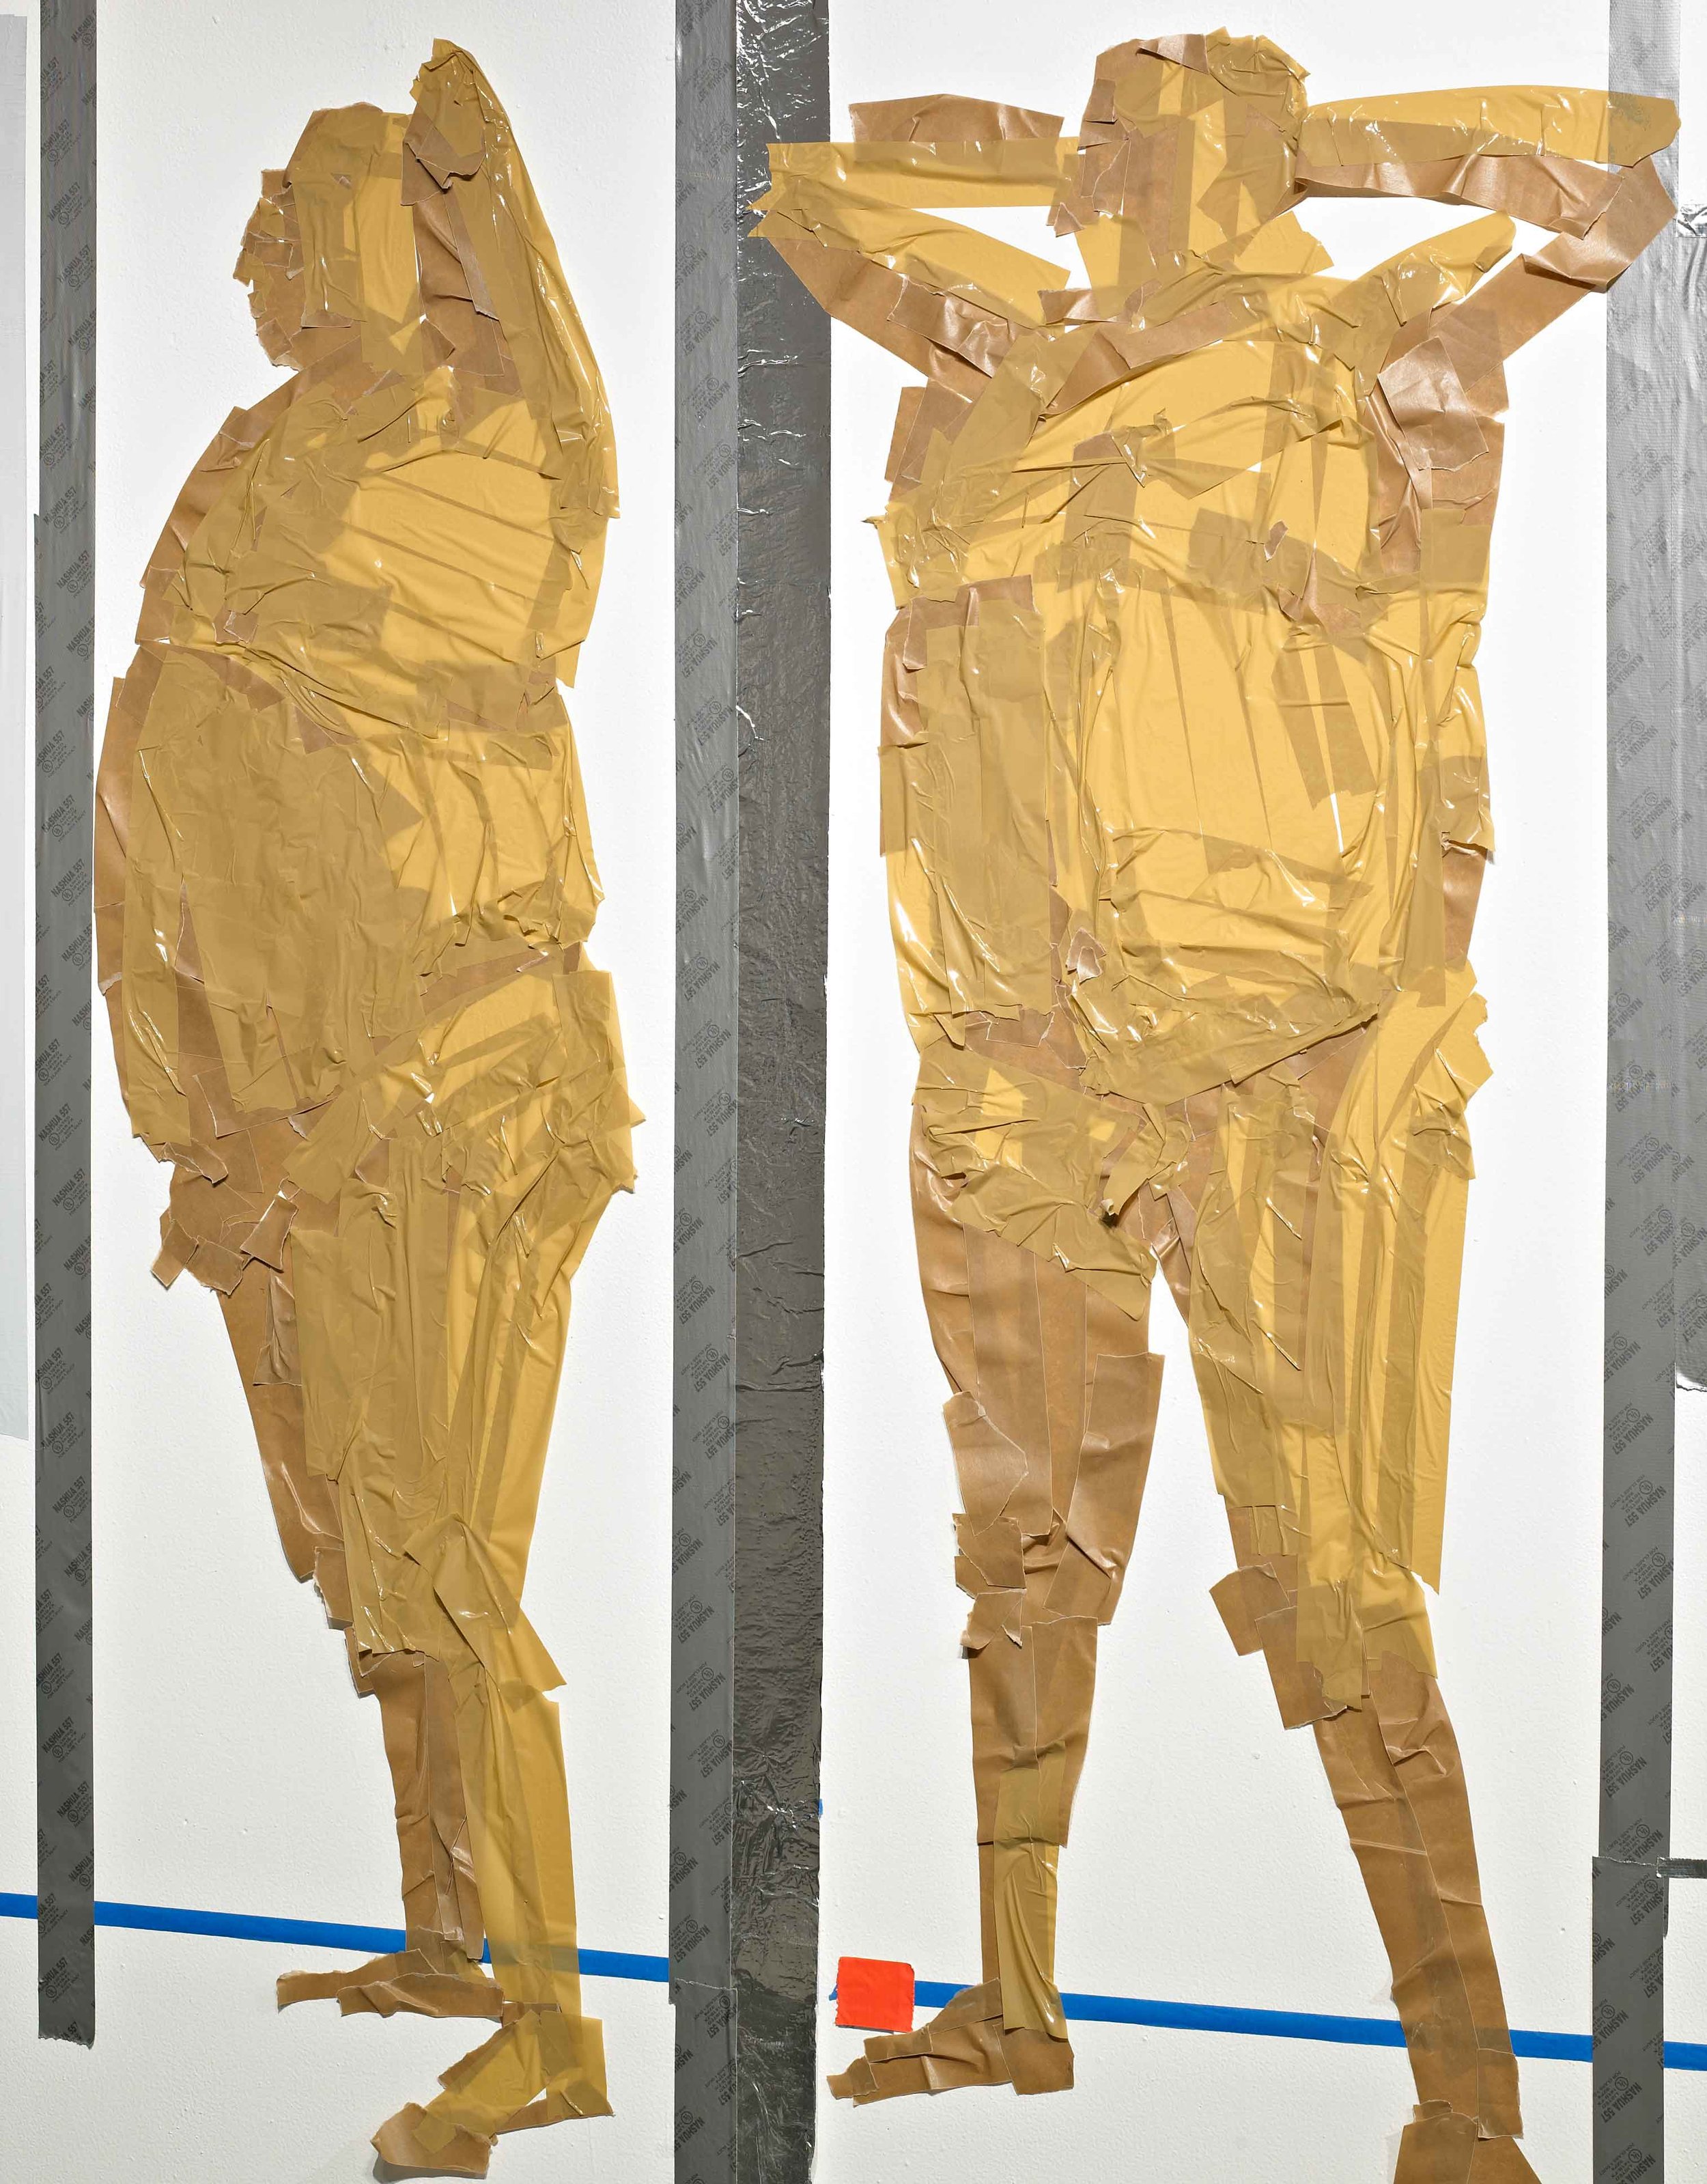  Airport In Security (detail), 8'x44', duct tape on wall, 2012 